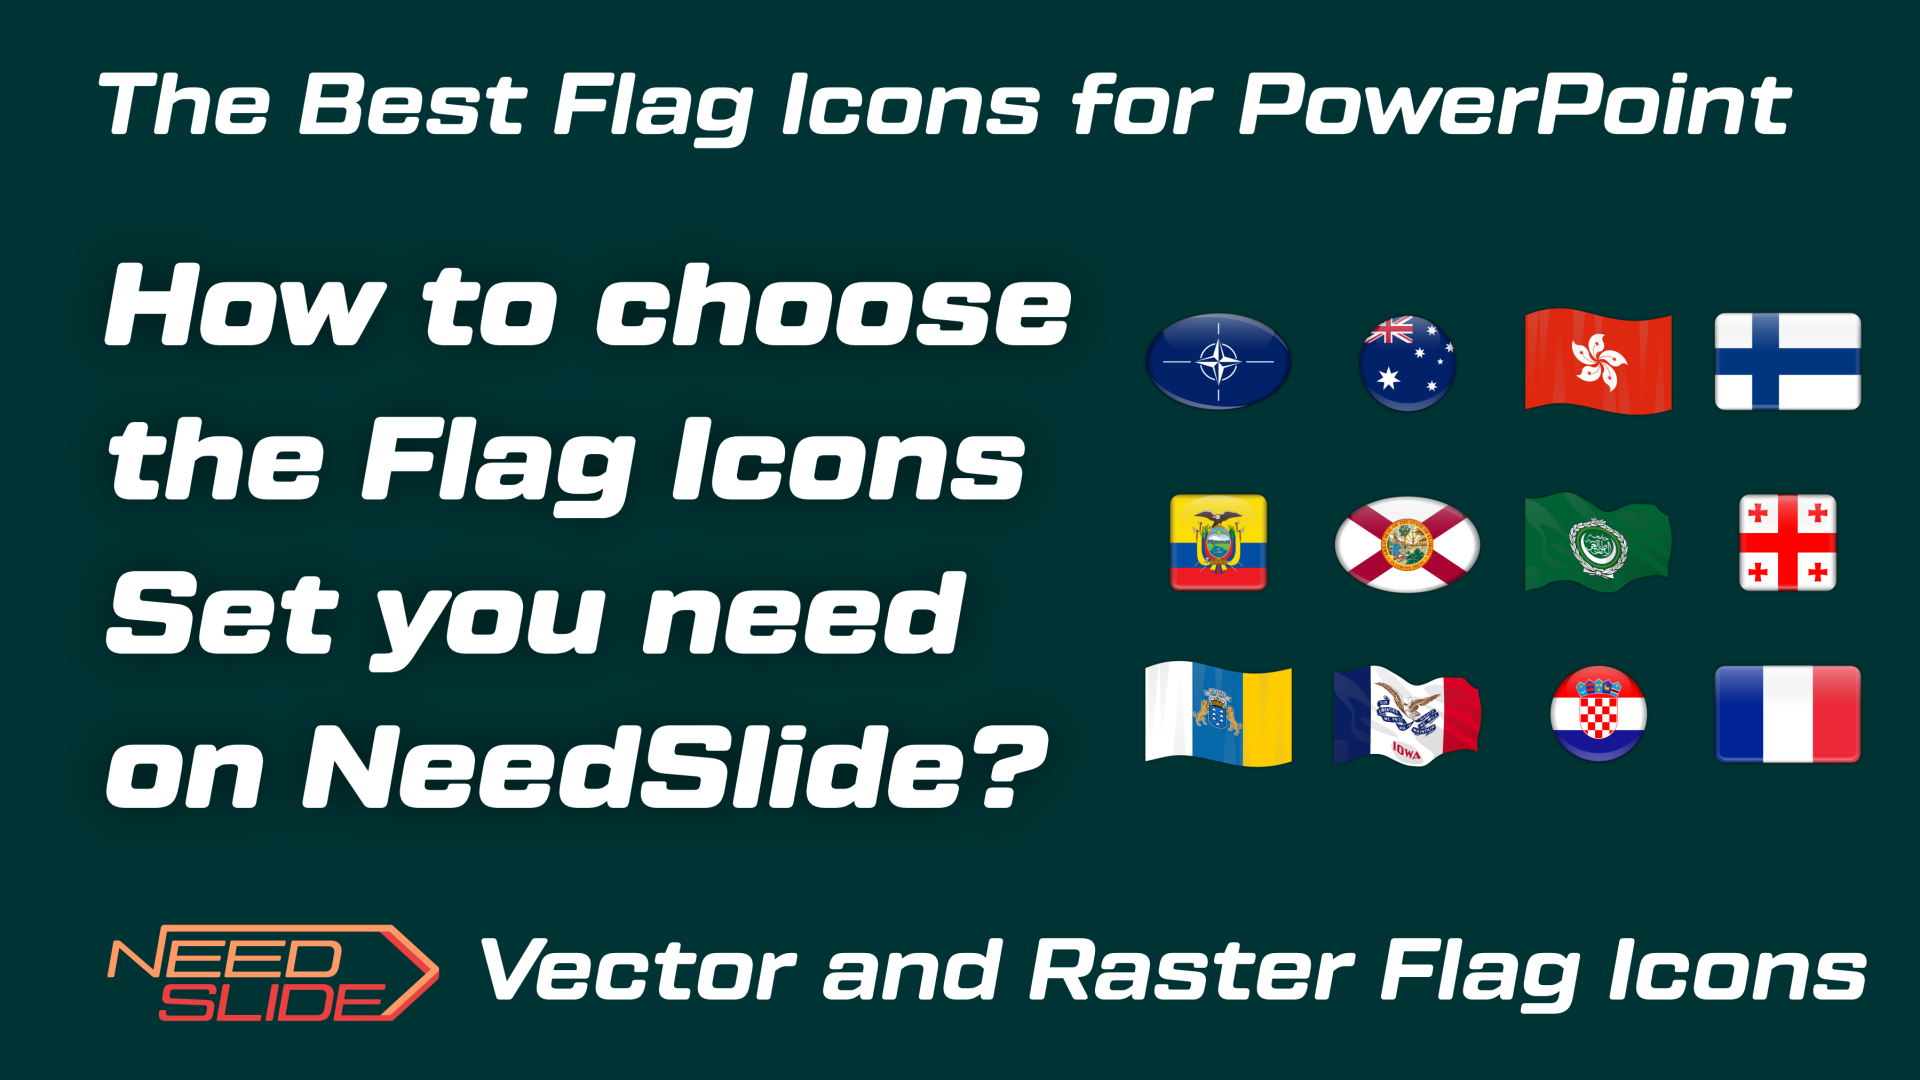 How to choose the Flag Icons Set on NeedSlide?